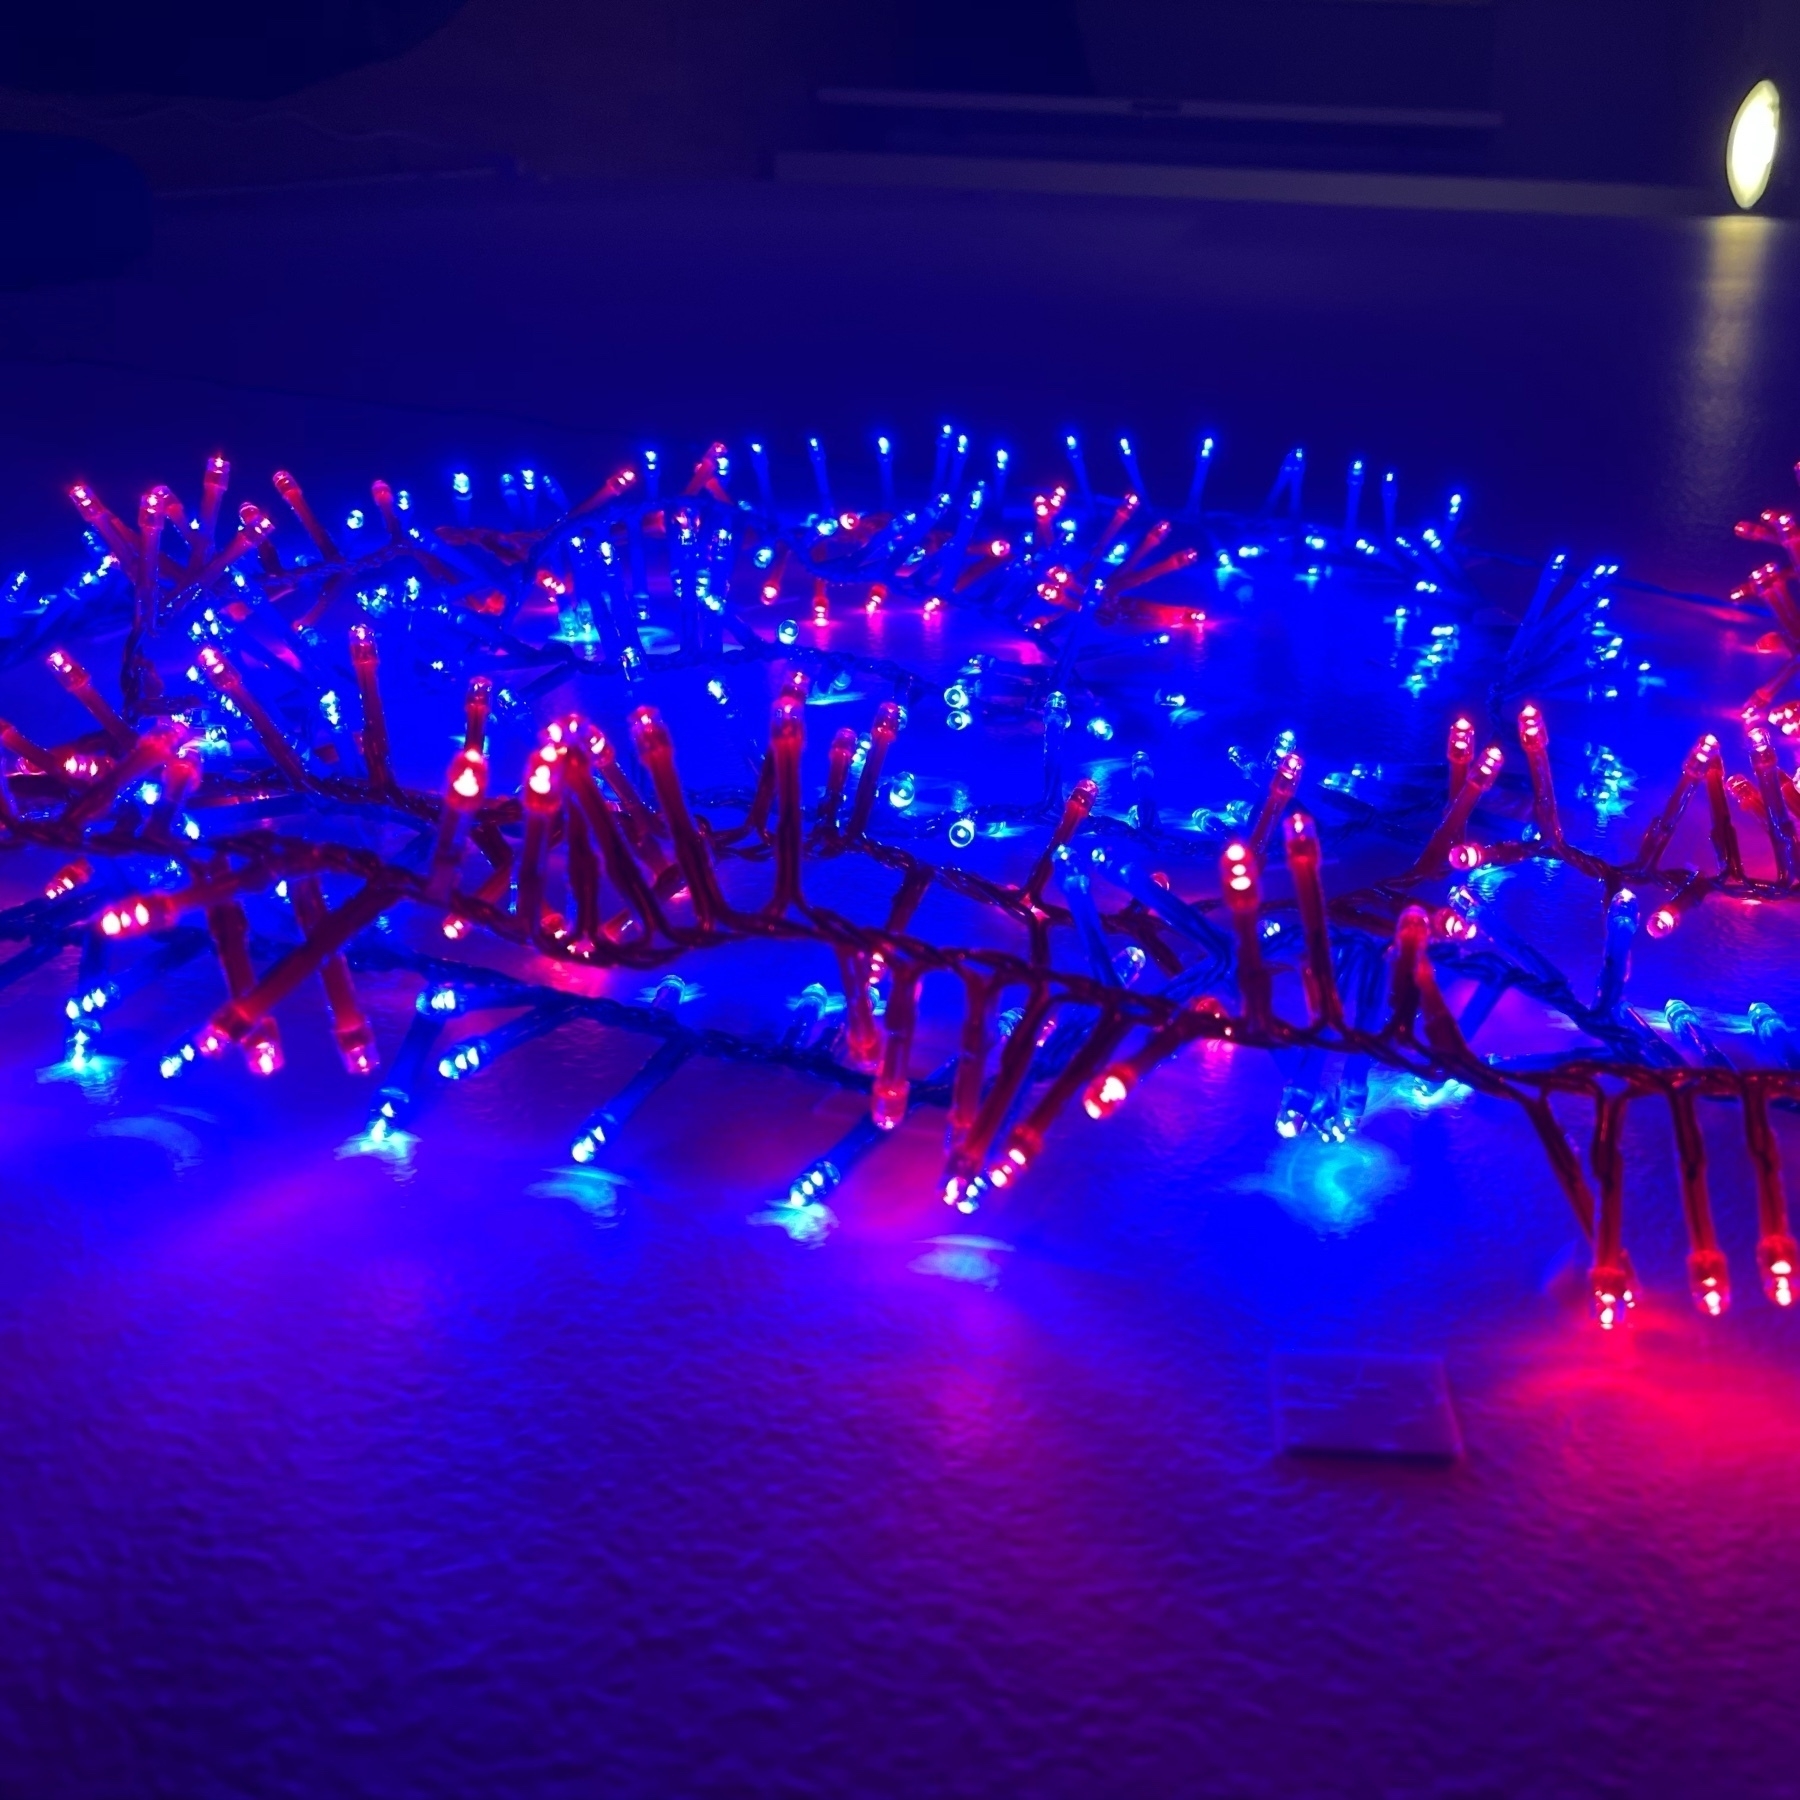 blue and red led light close up